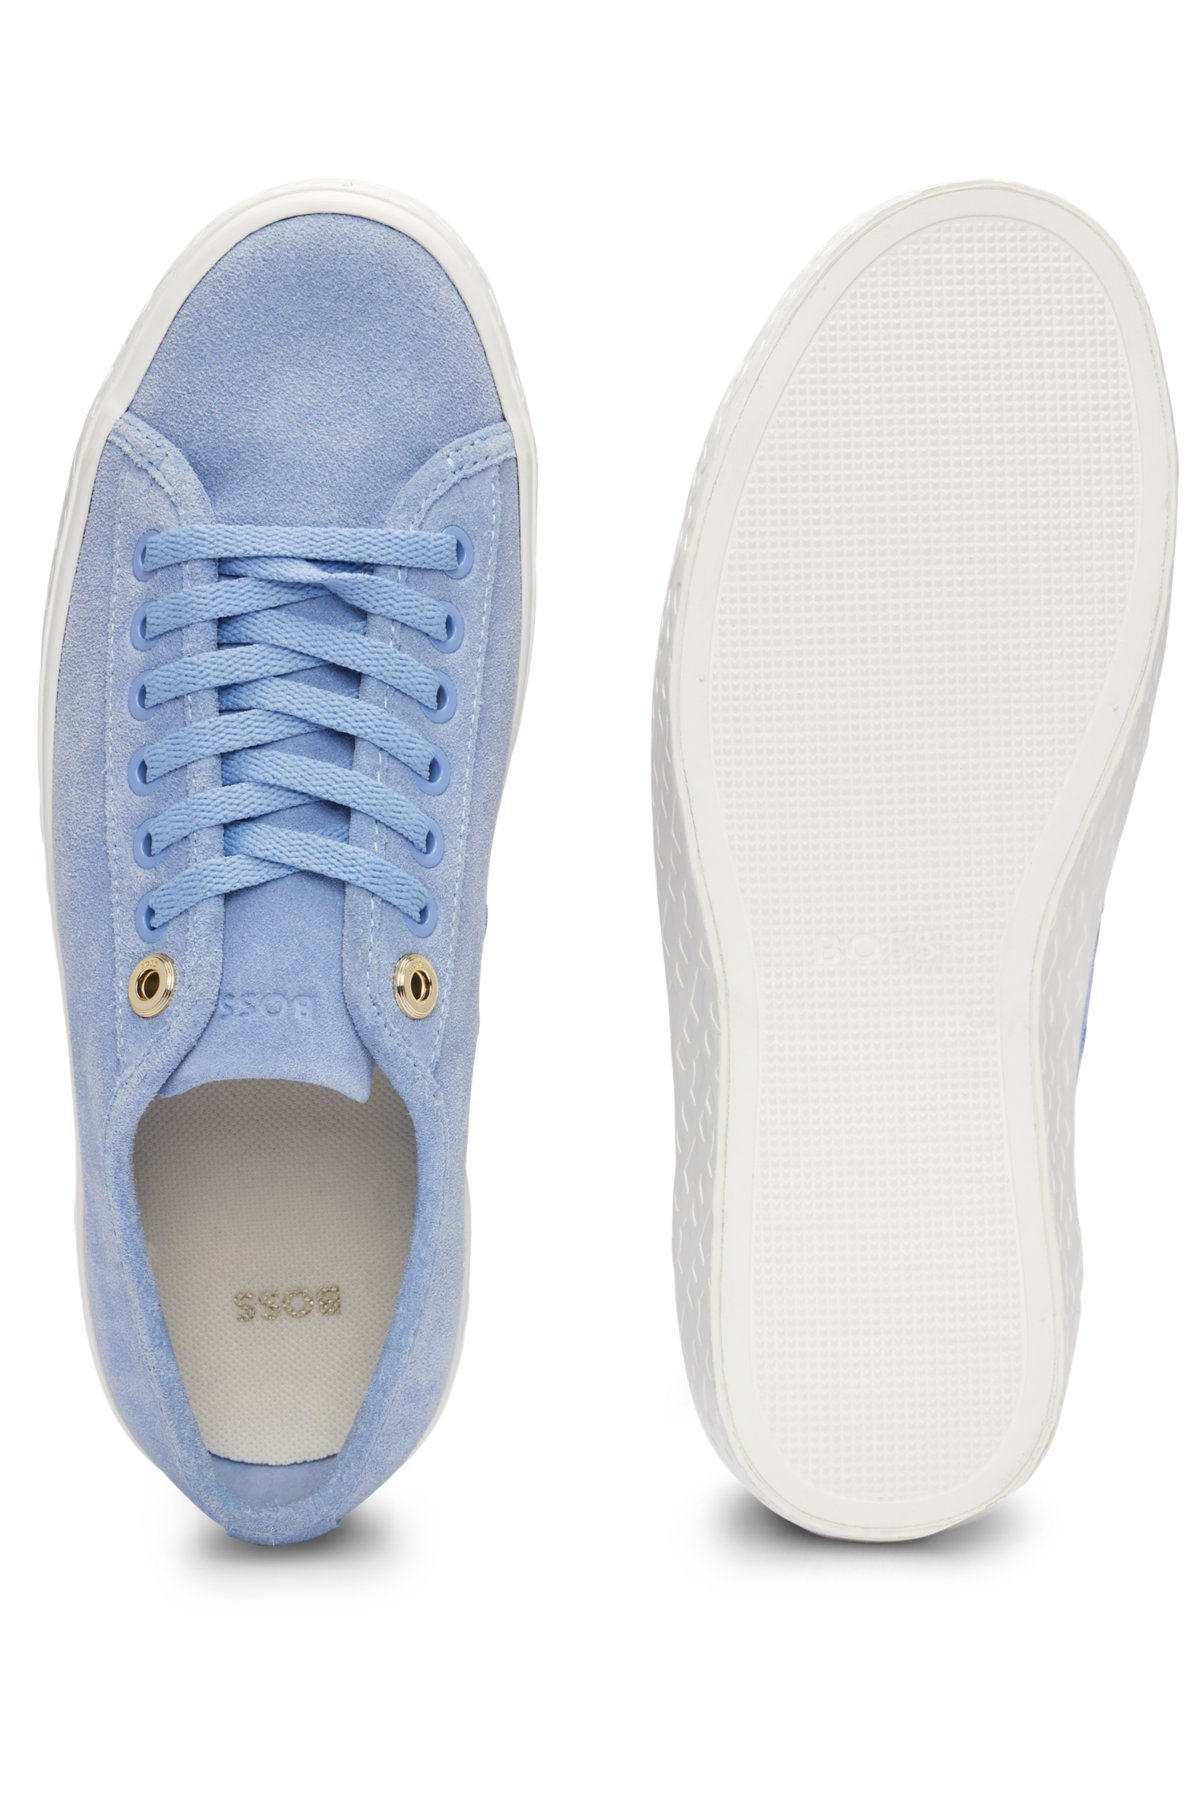 Suede lace-up trainers with branded eyelets, Light Blue